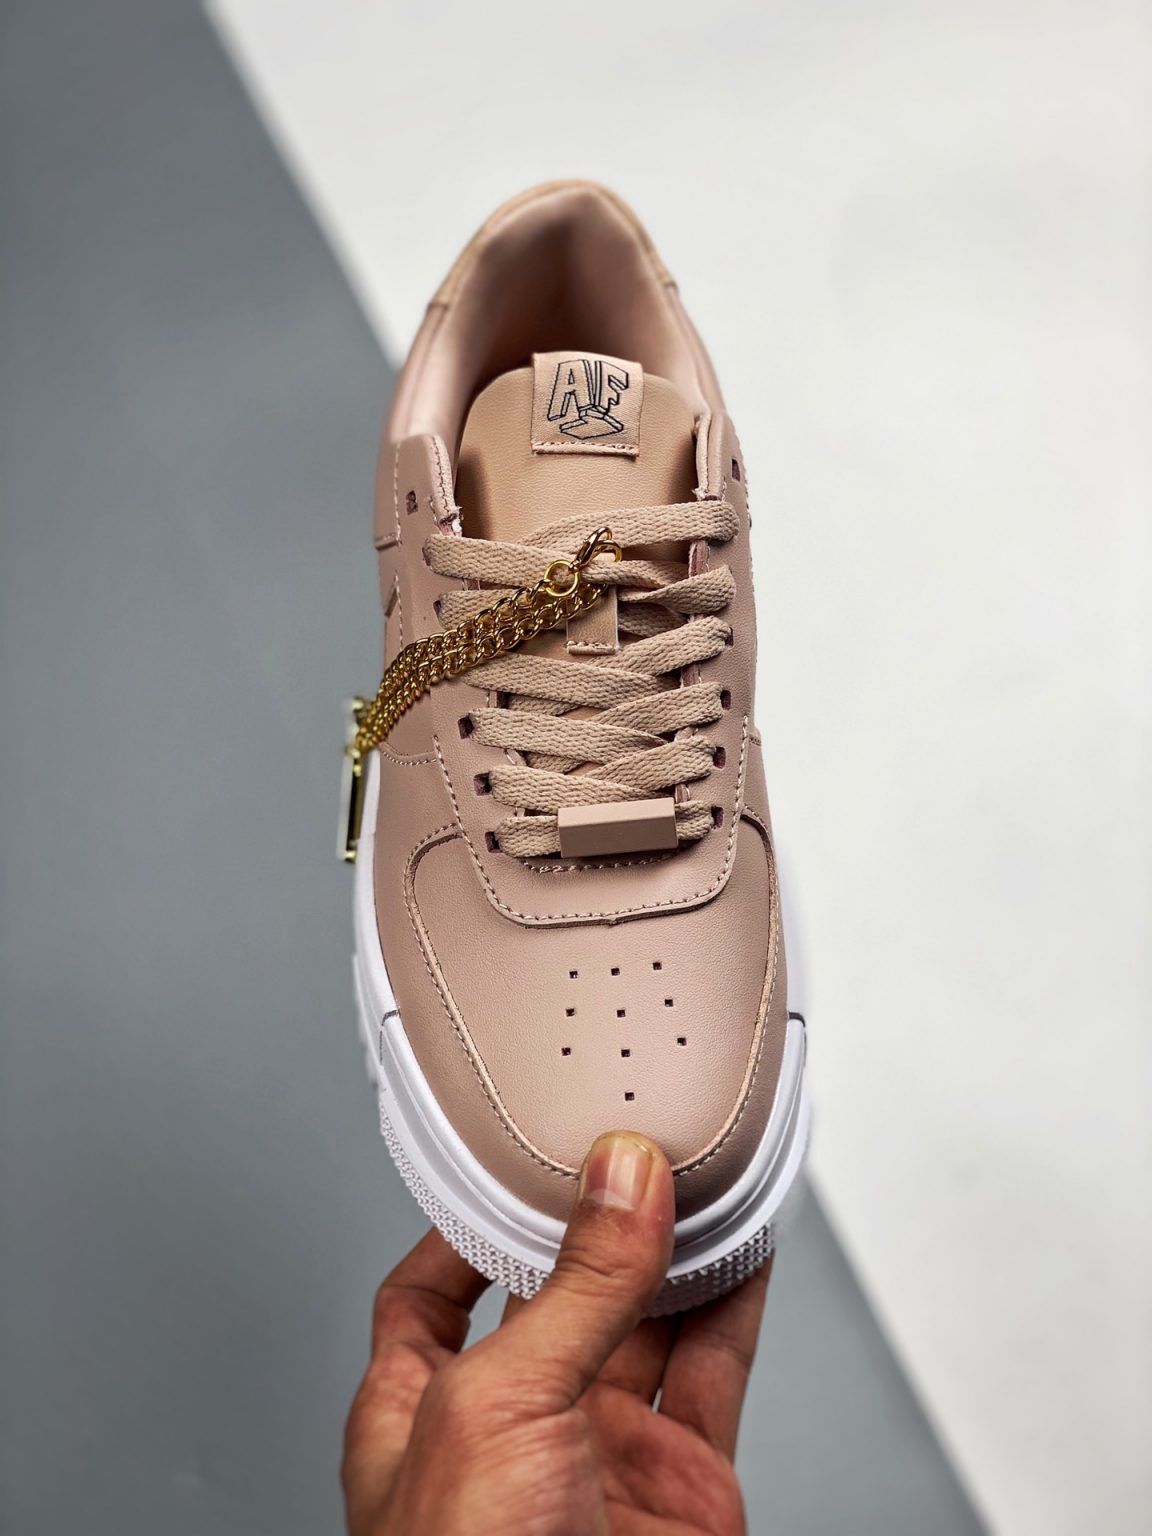 Nike Air Force 1 Pixel Particle Beige CK6649-200 For Sale – Sneaker Hello